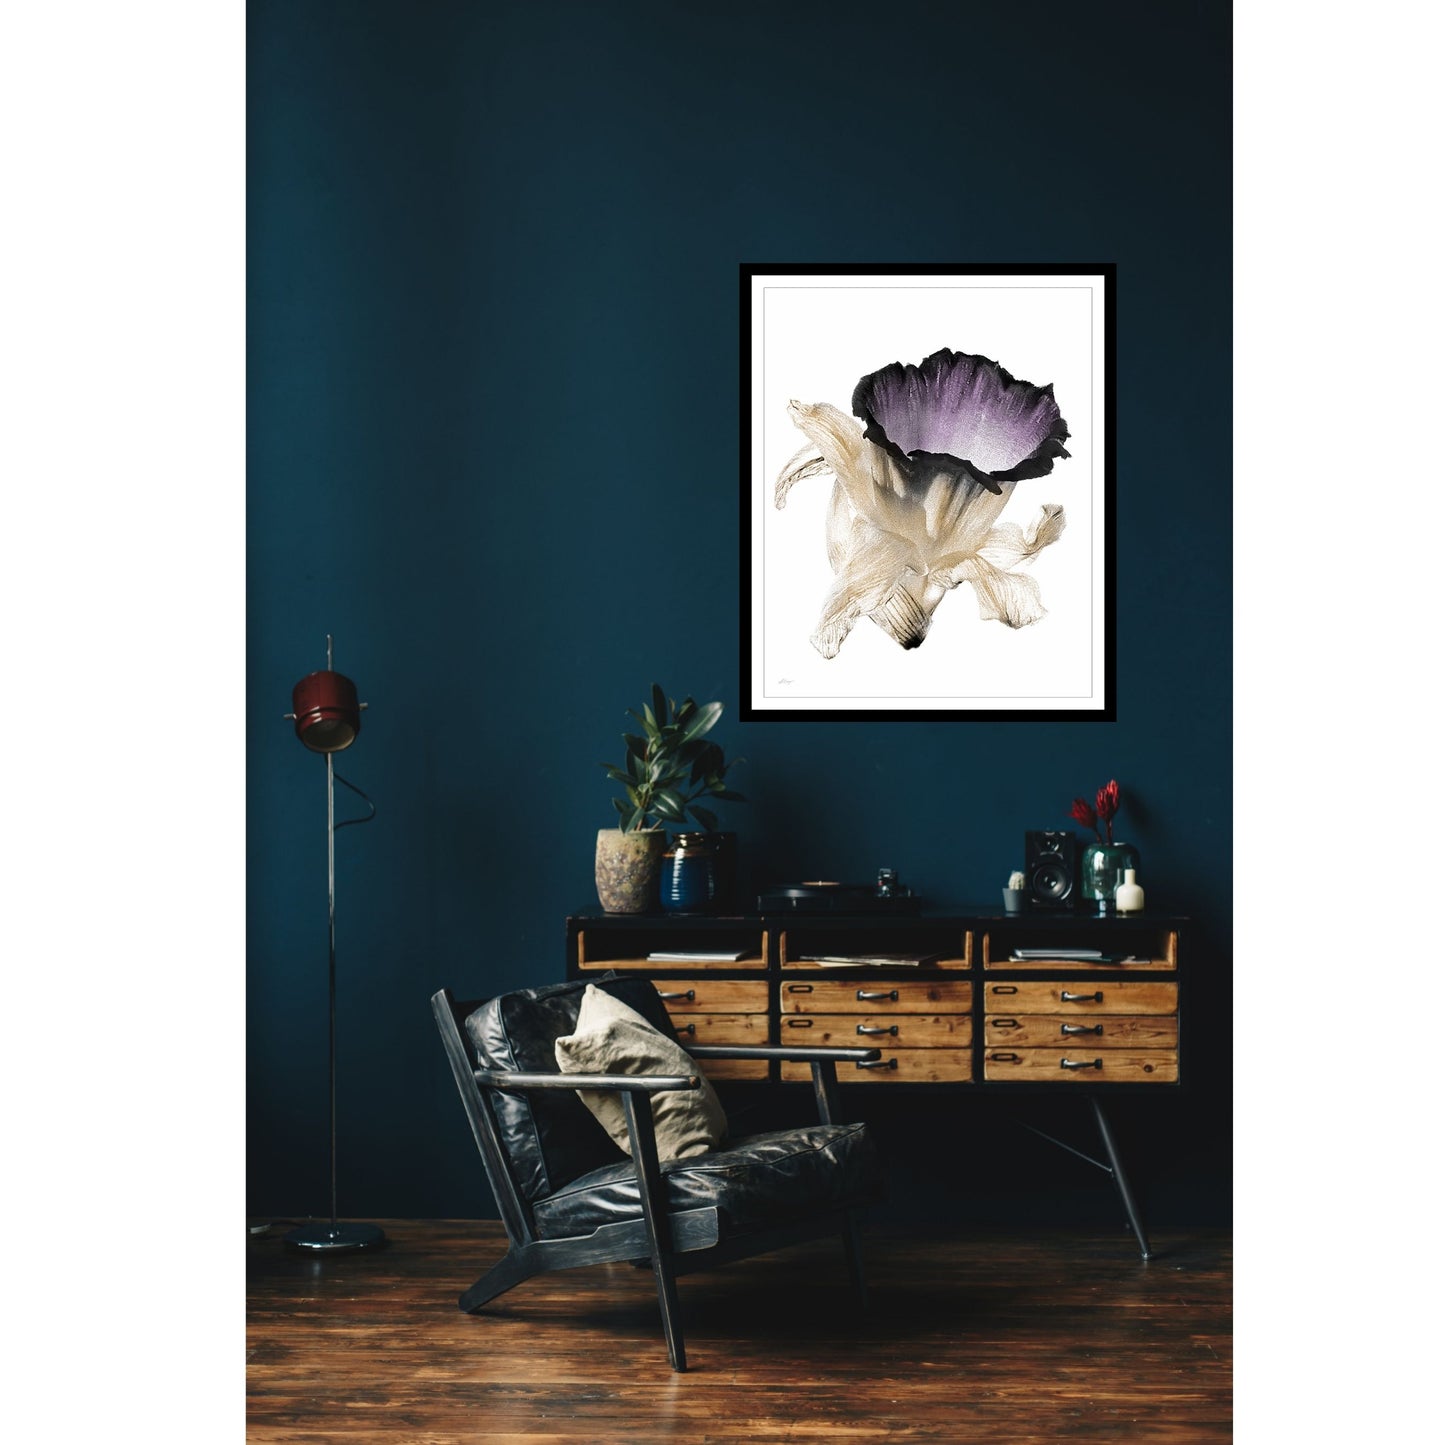 Abstract Floral on a breeze photo in a room with dark blue walls, a pine desk and black leather chair